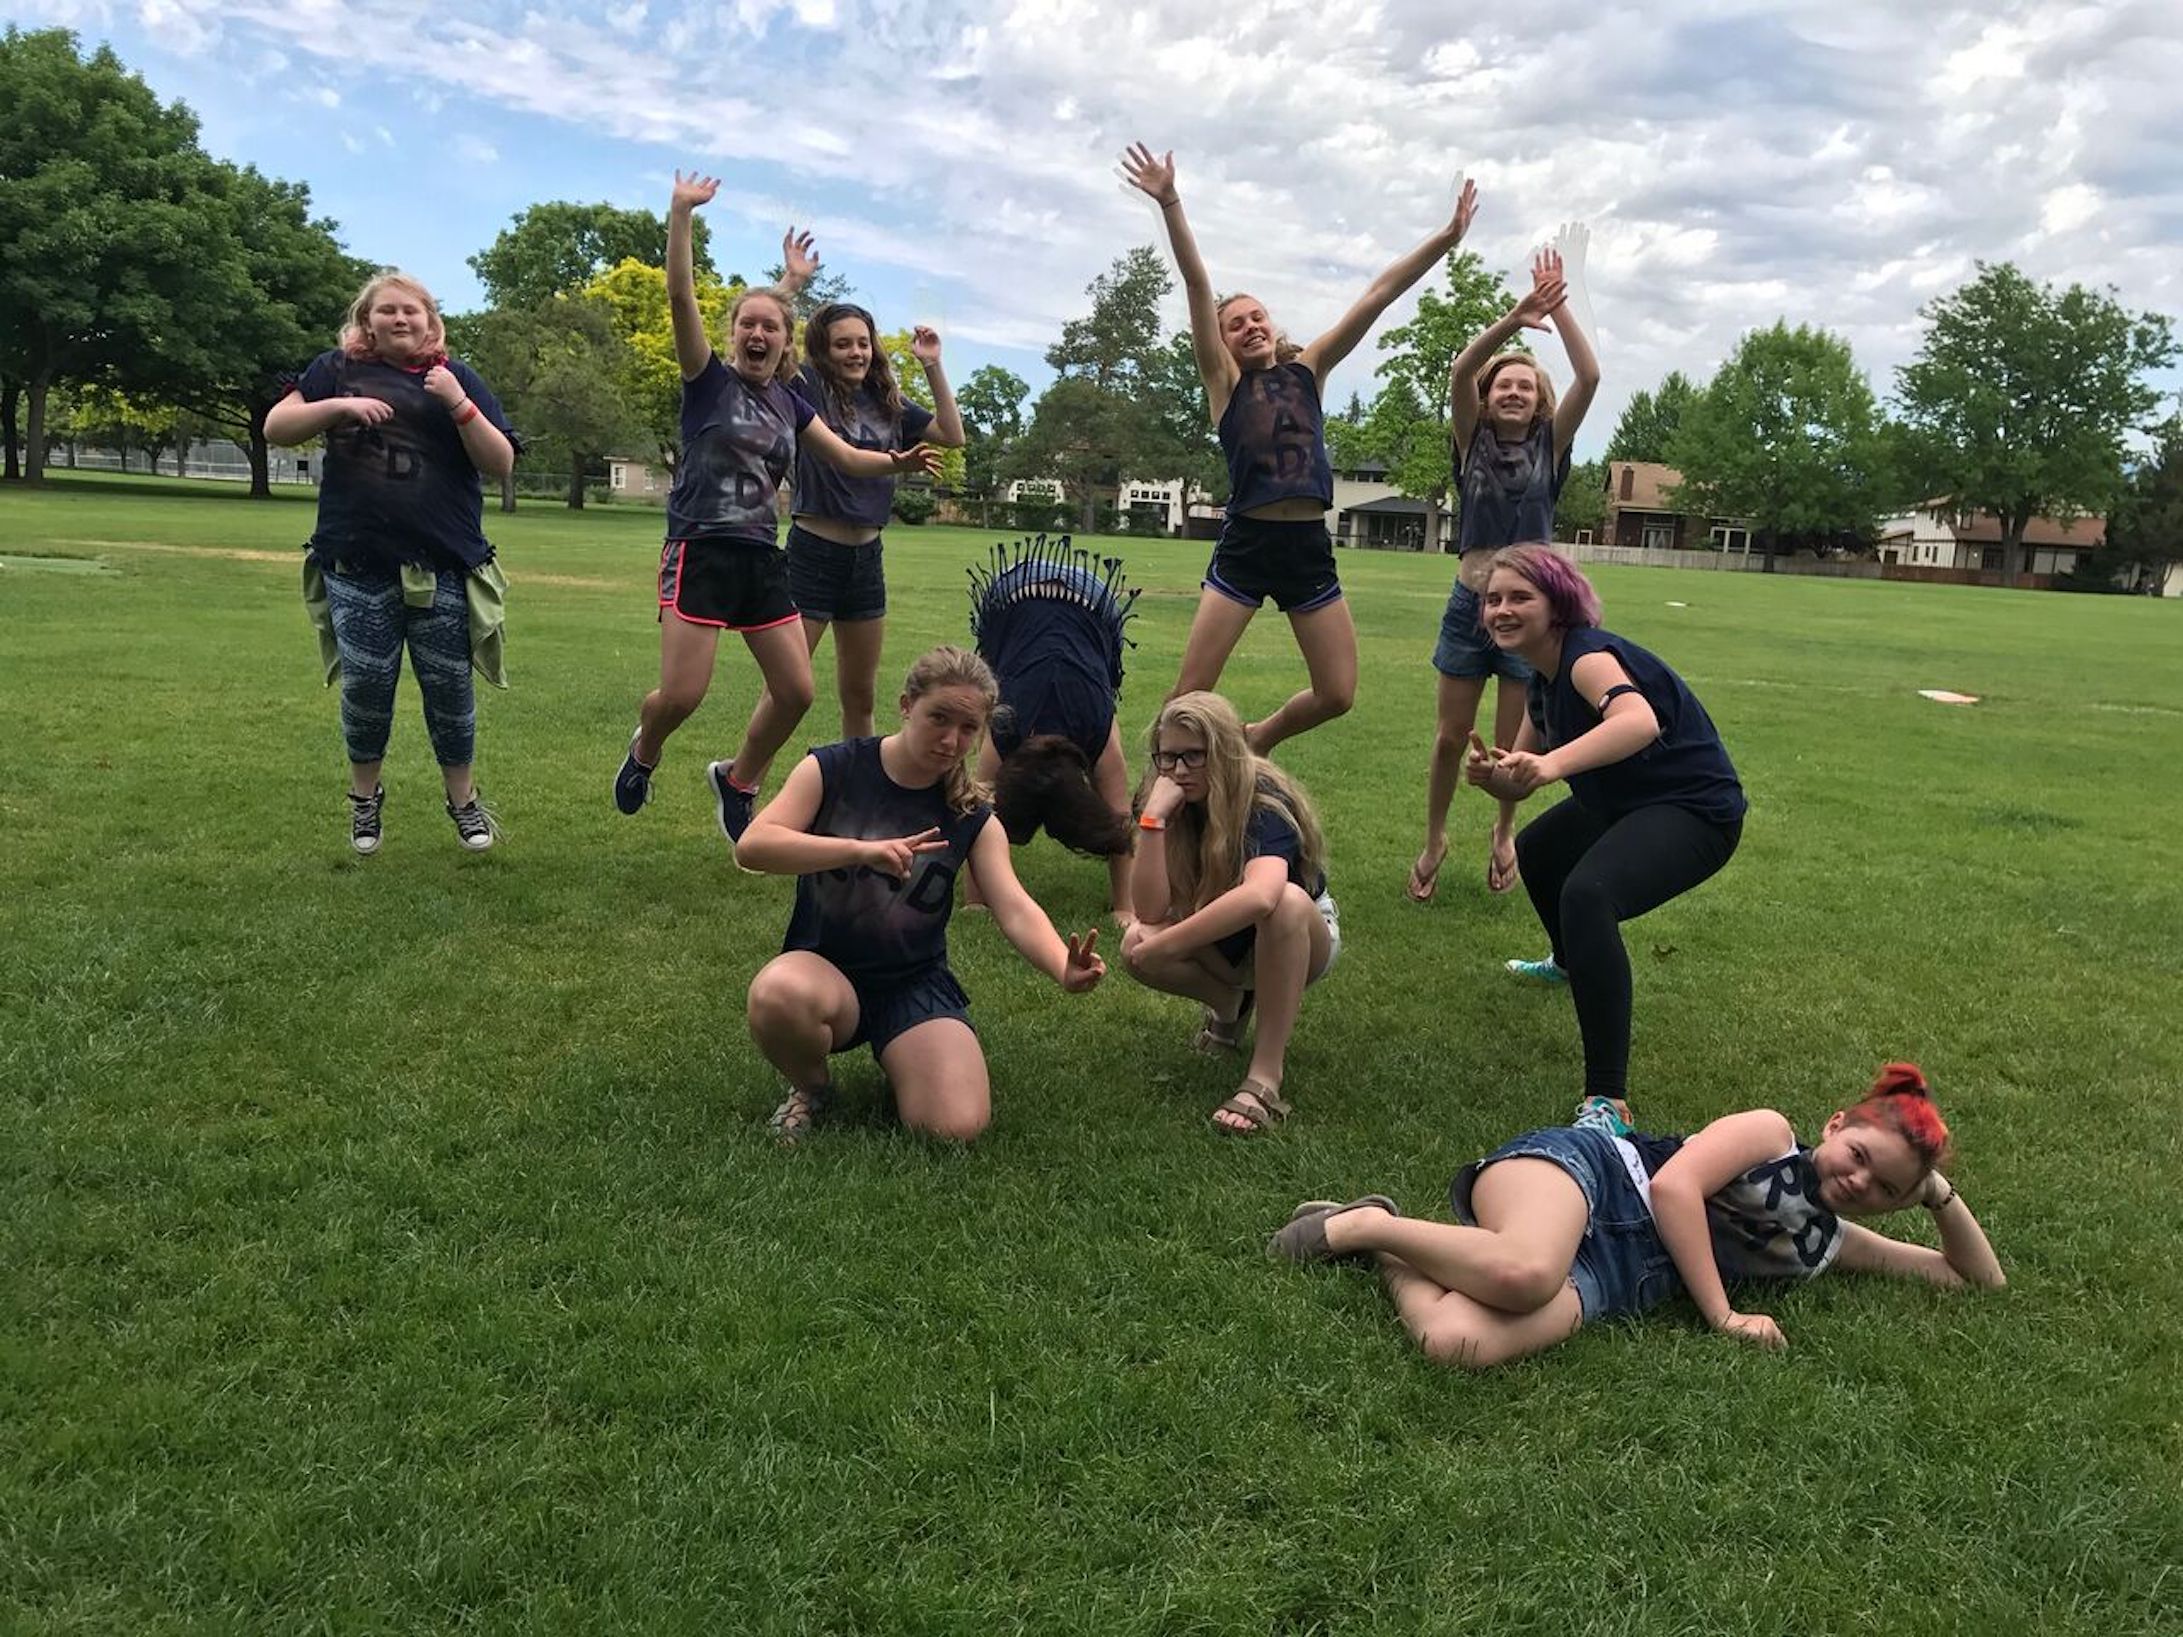 RADCAMP: A Body Positive Boot Camp for Feminist Teens!